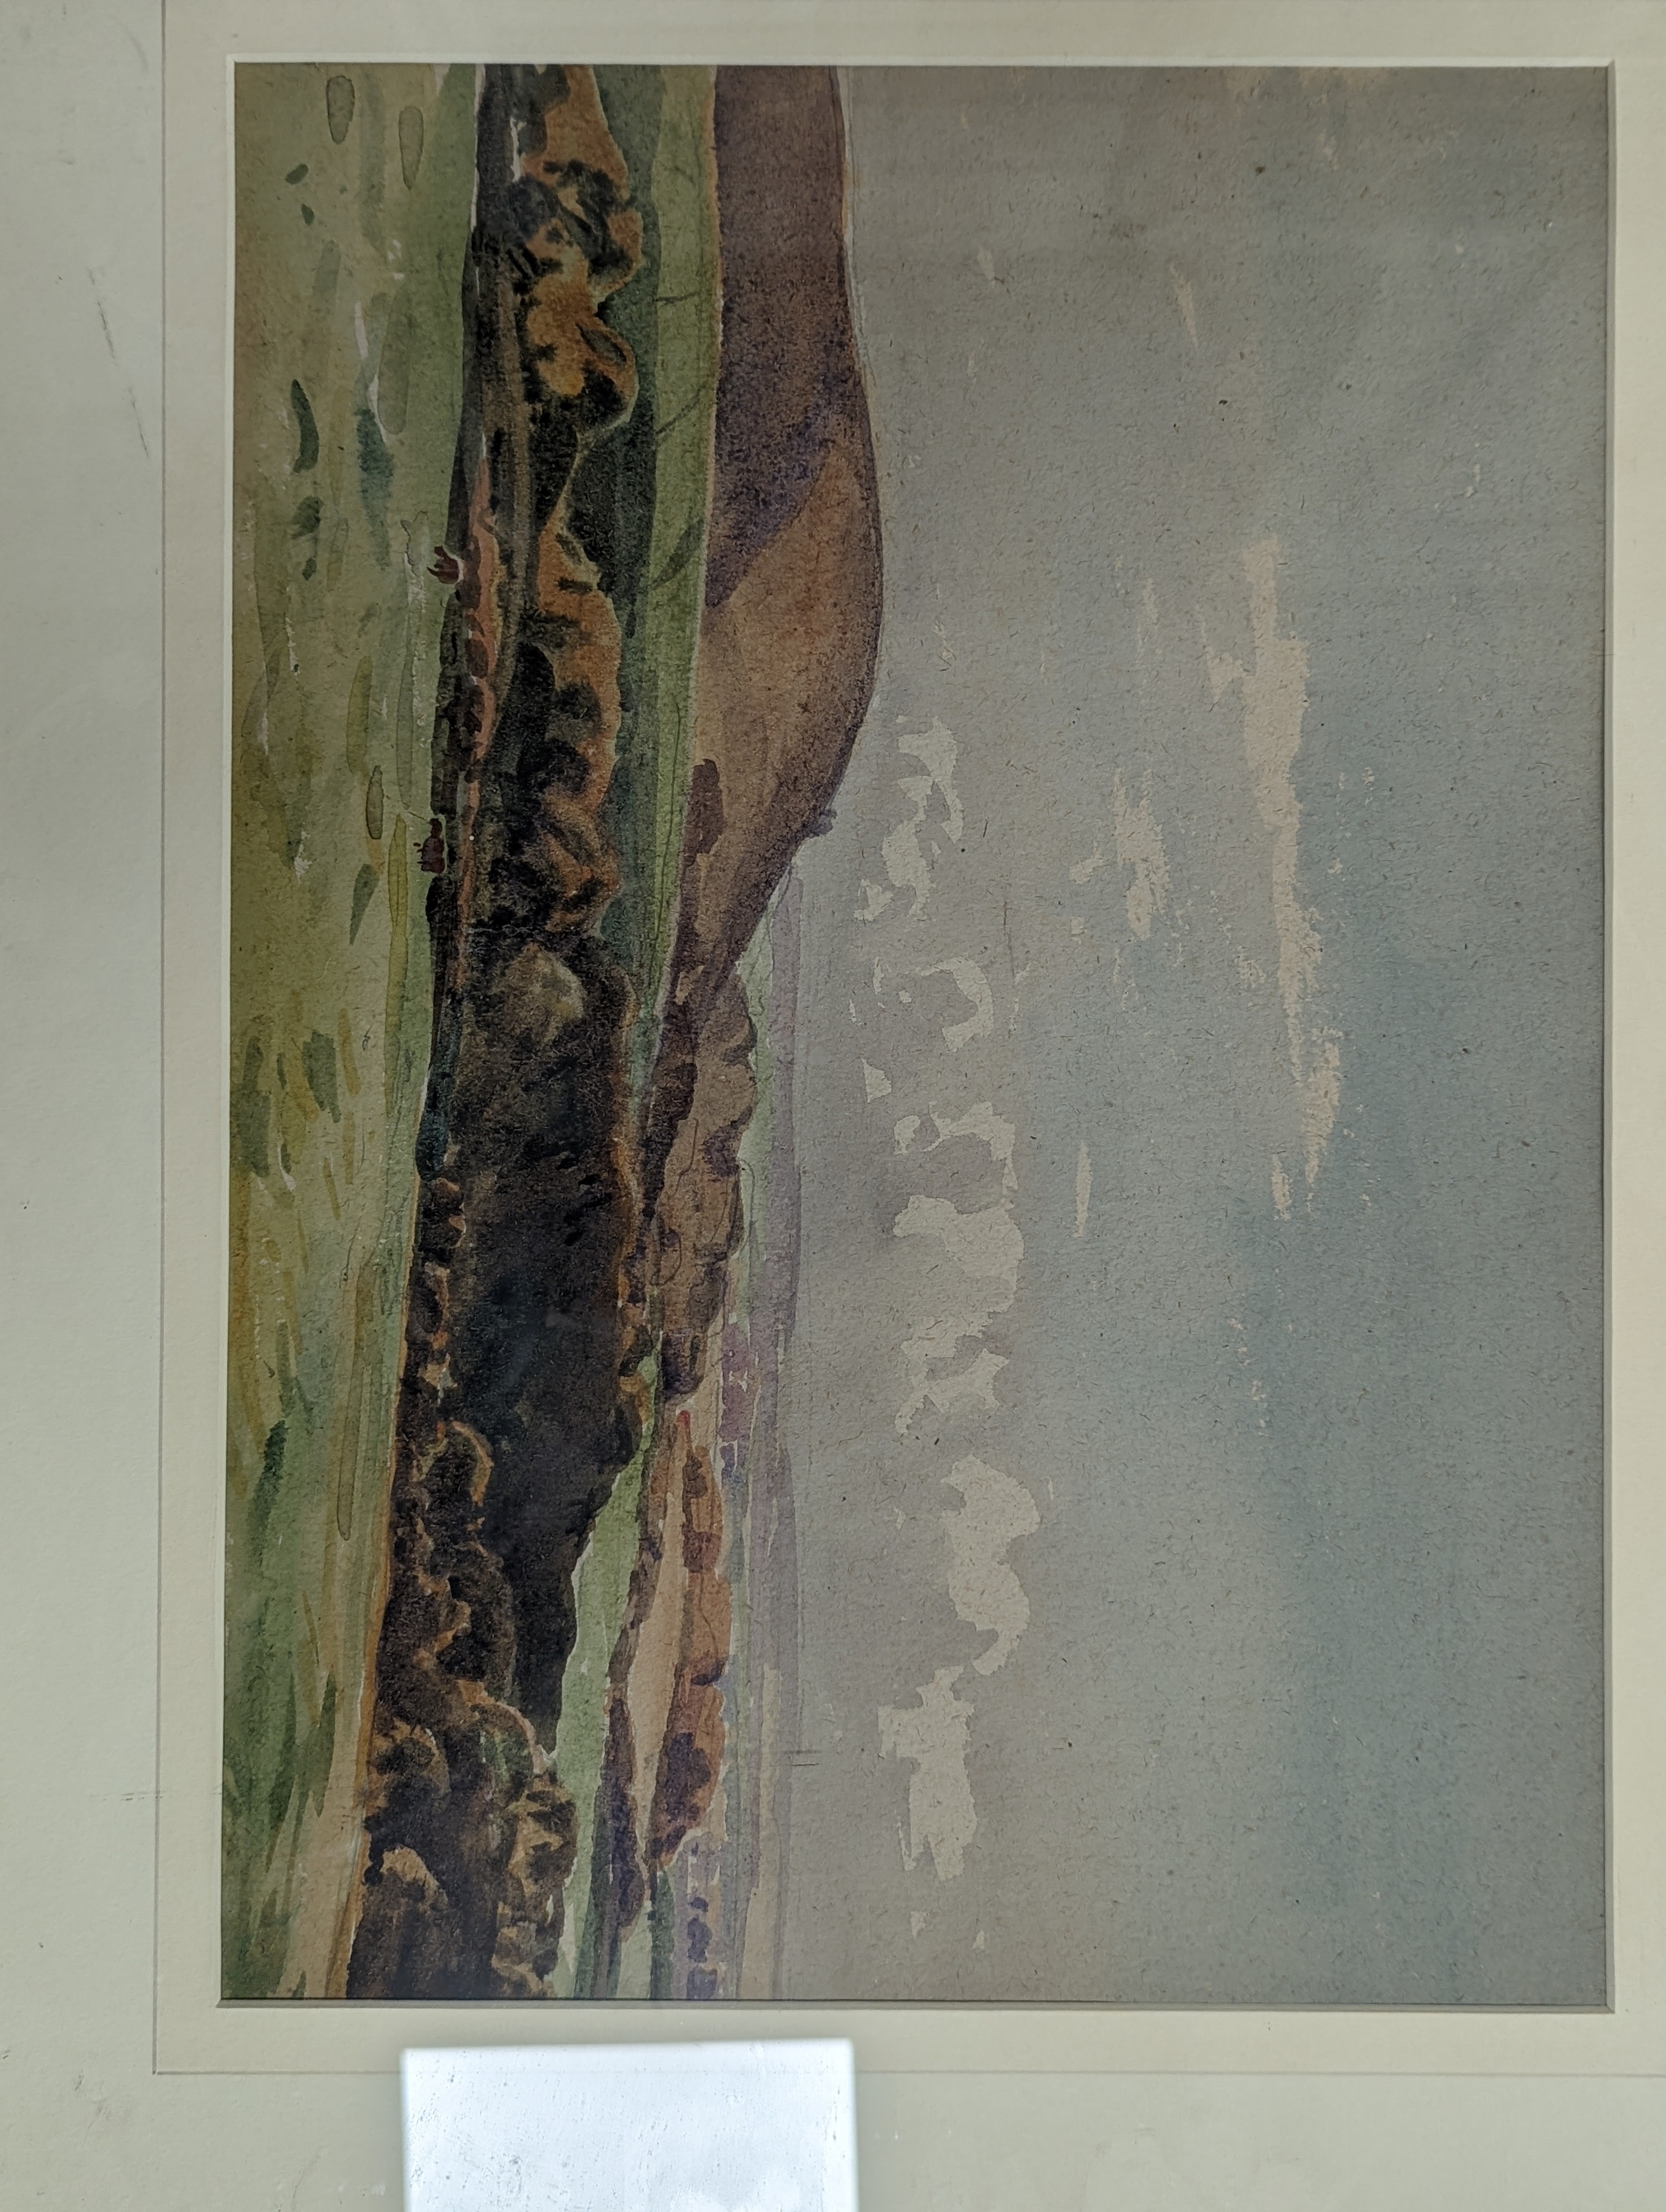 Walter Robert Stewart Acton (1879-1960), five watercolours, Views along the South Downs, largest 32 x 45cm